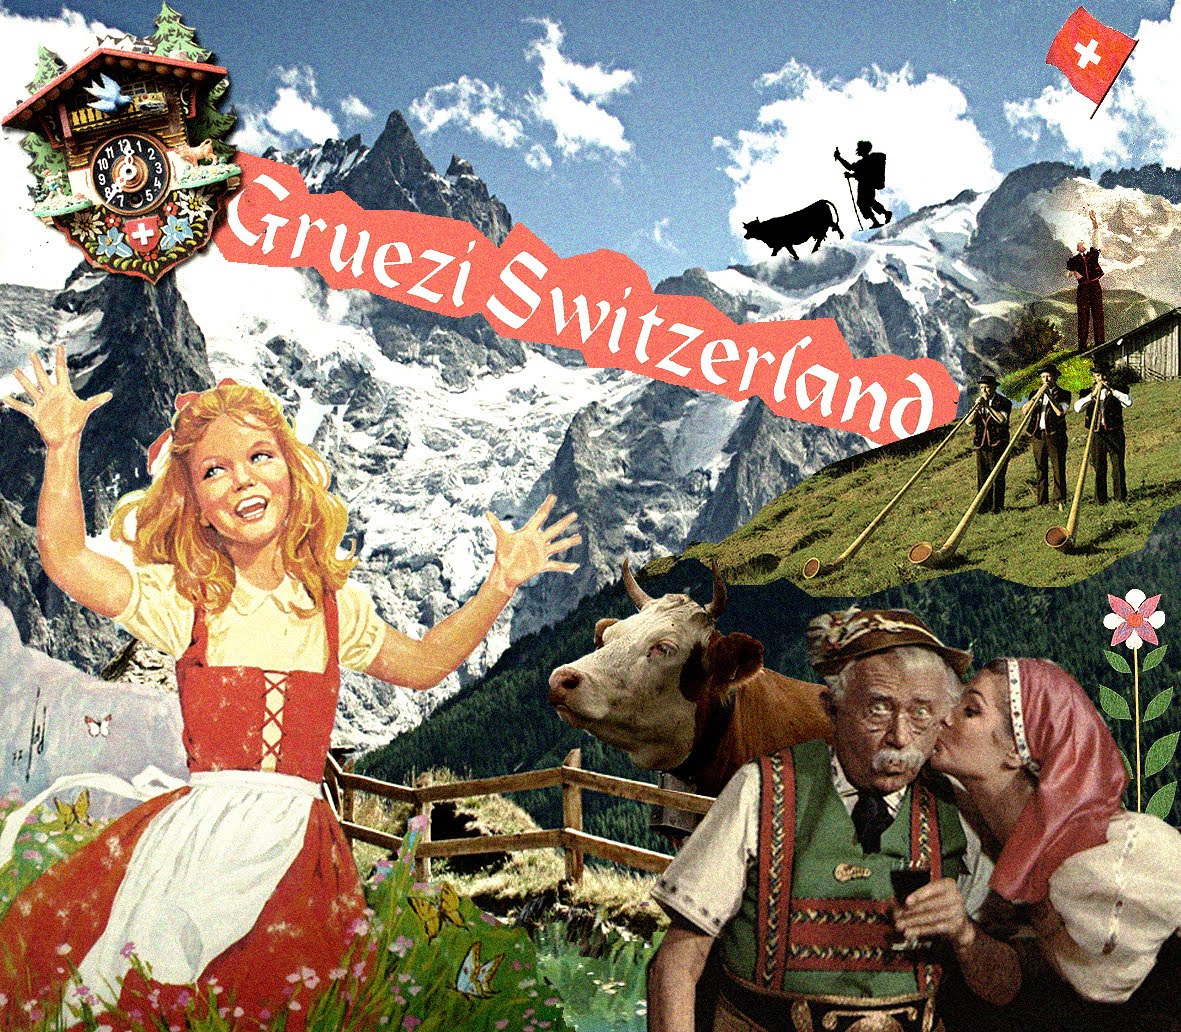 The Swiss Culture published by Alexandre Walen